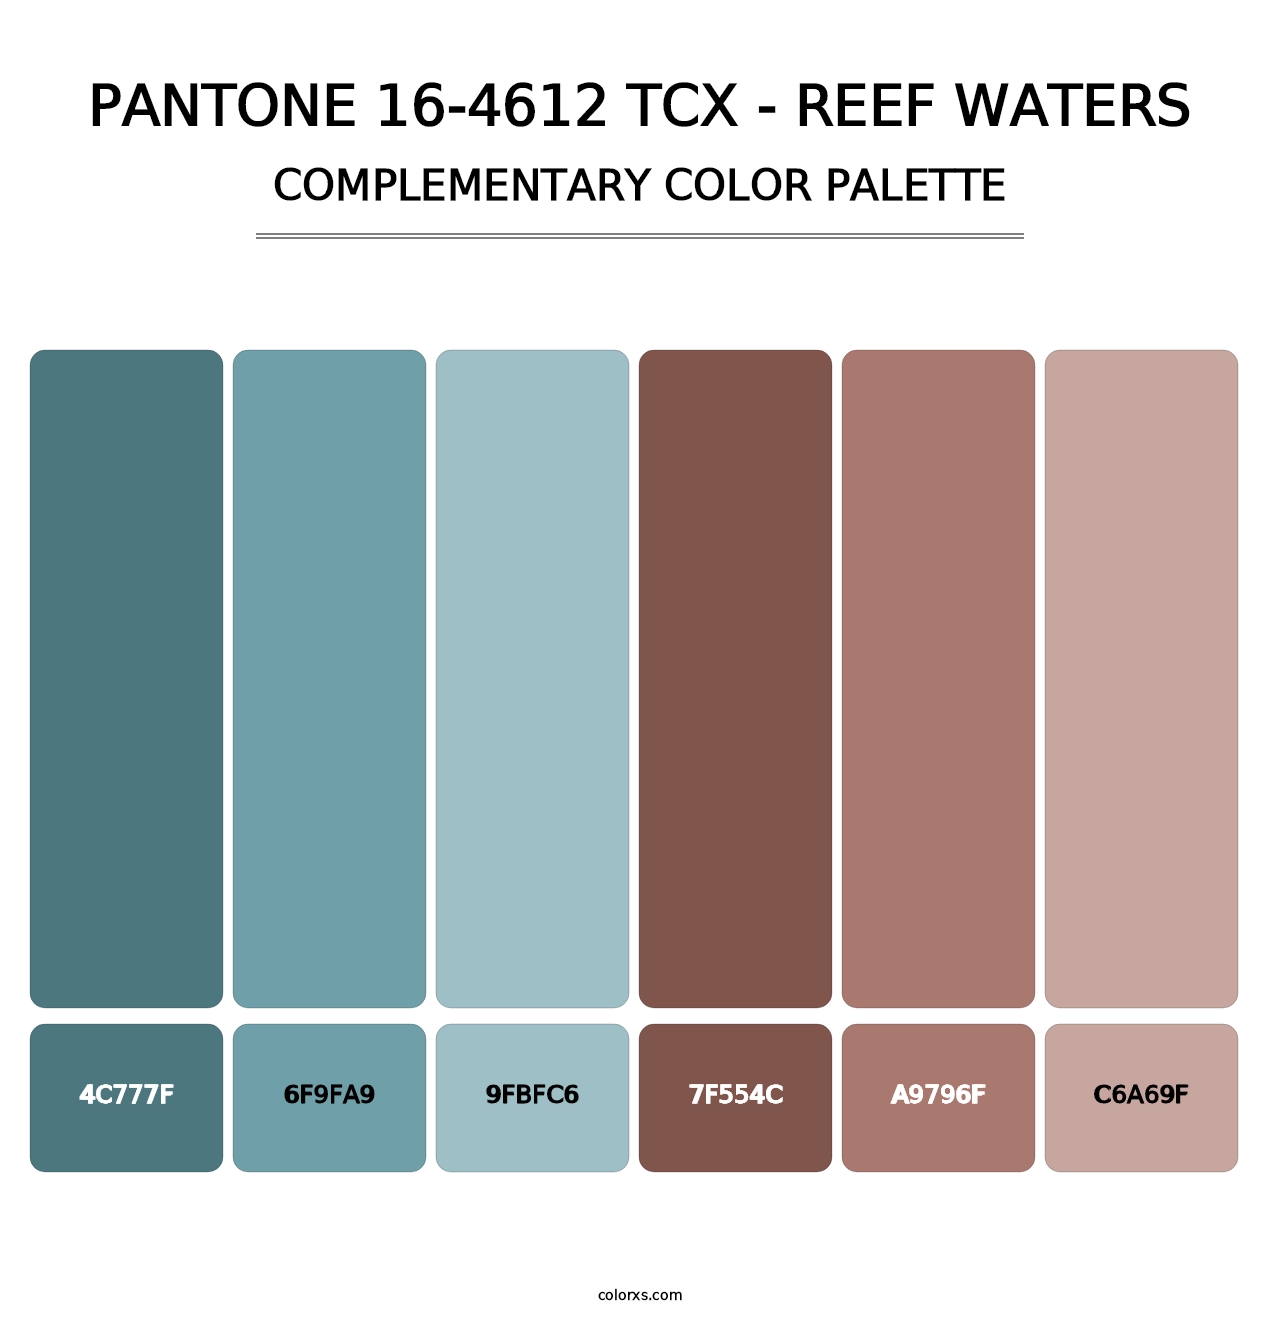 PANTONE 16-4612 TCX - Reef Waters - Complementary Color Palette